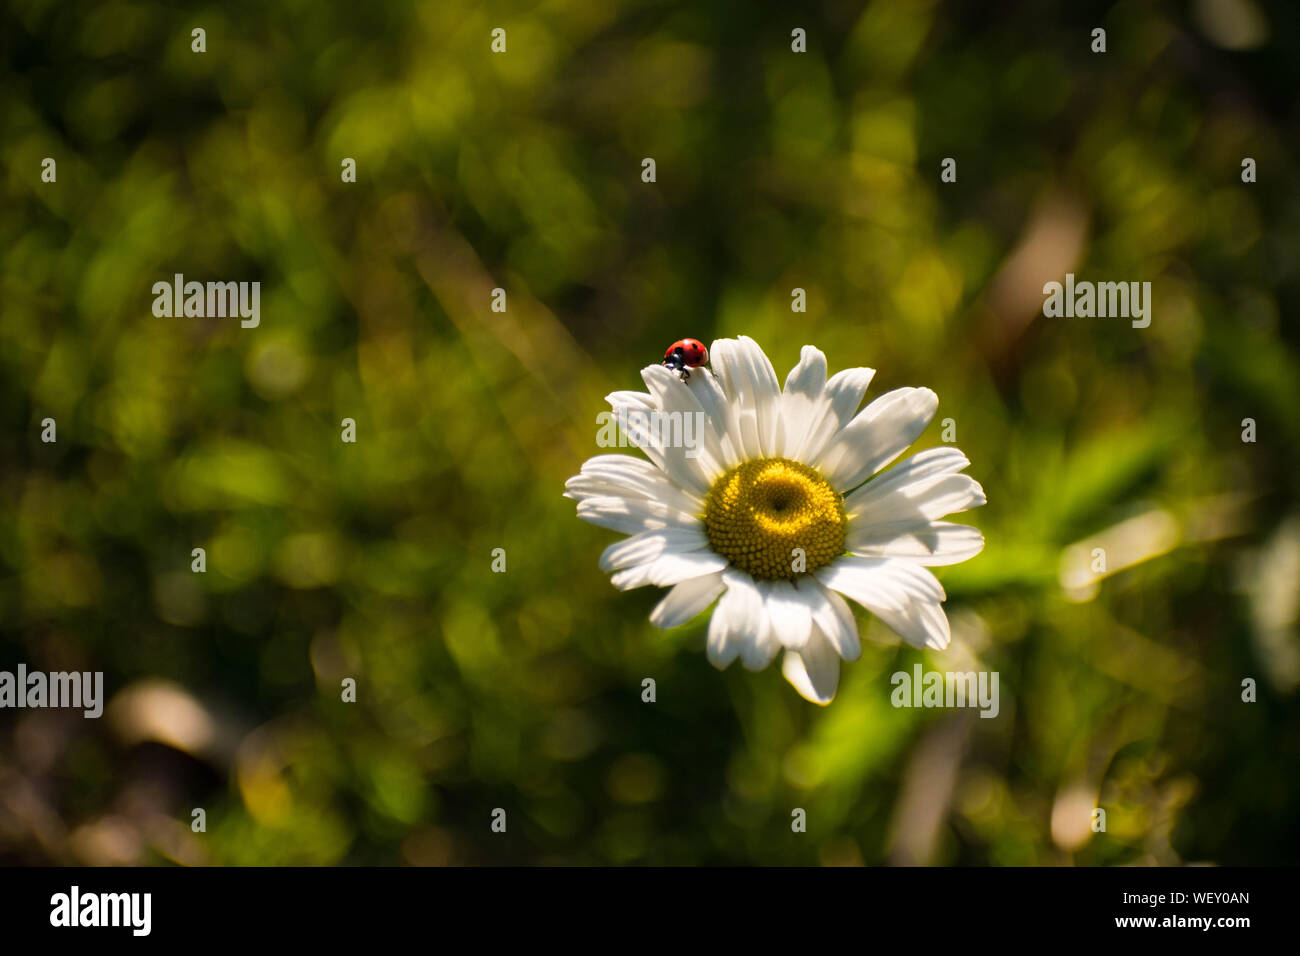 A close up shot of flowers in the garden making perfect wallpaper backgrounds. Stock Photo